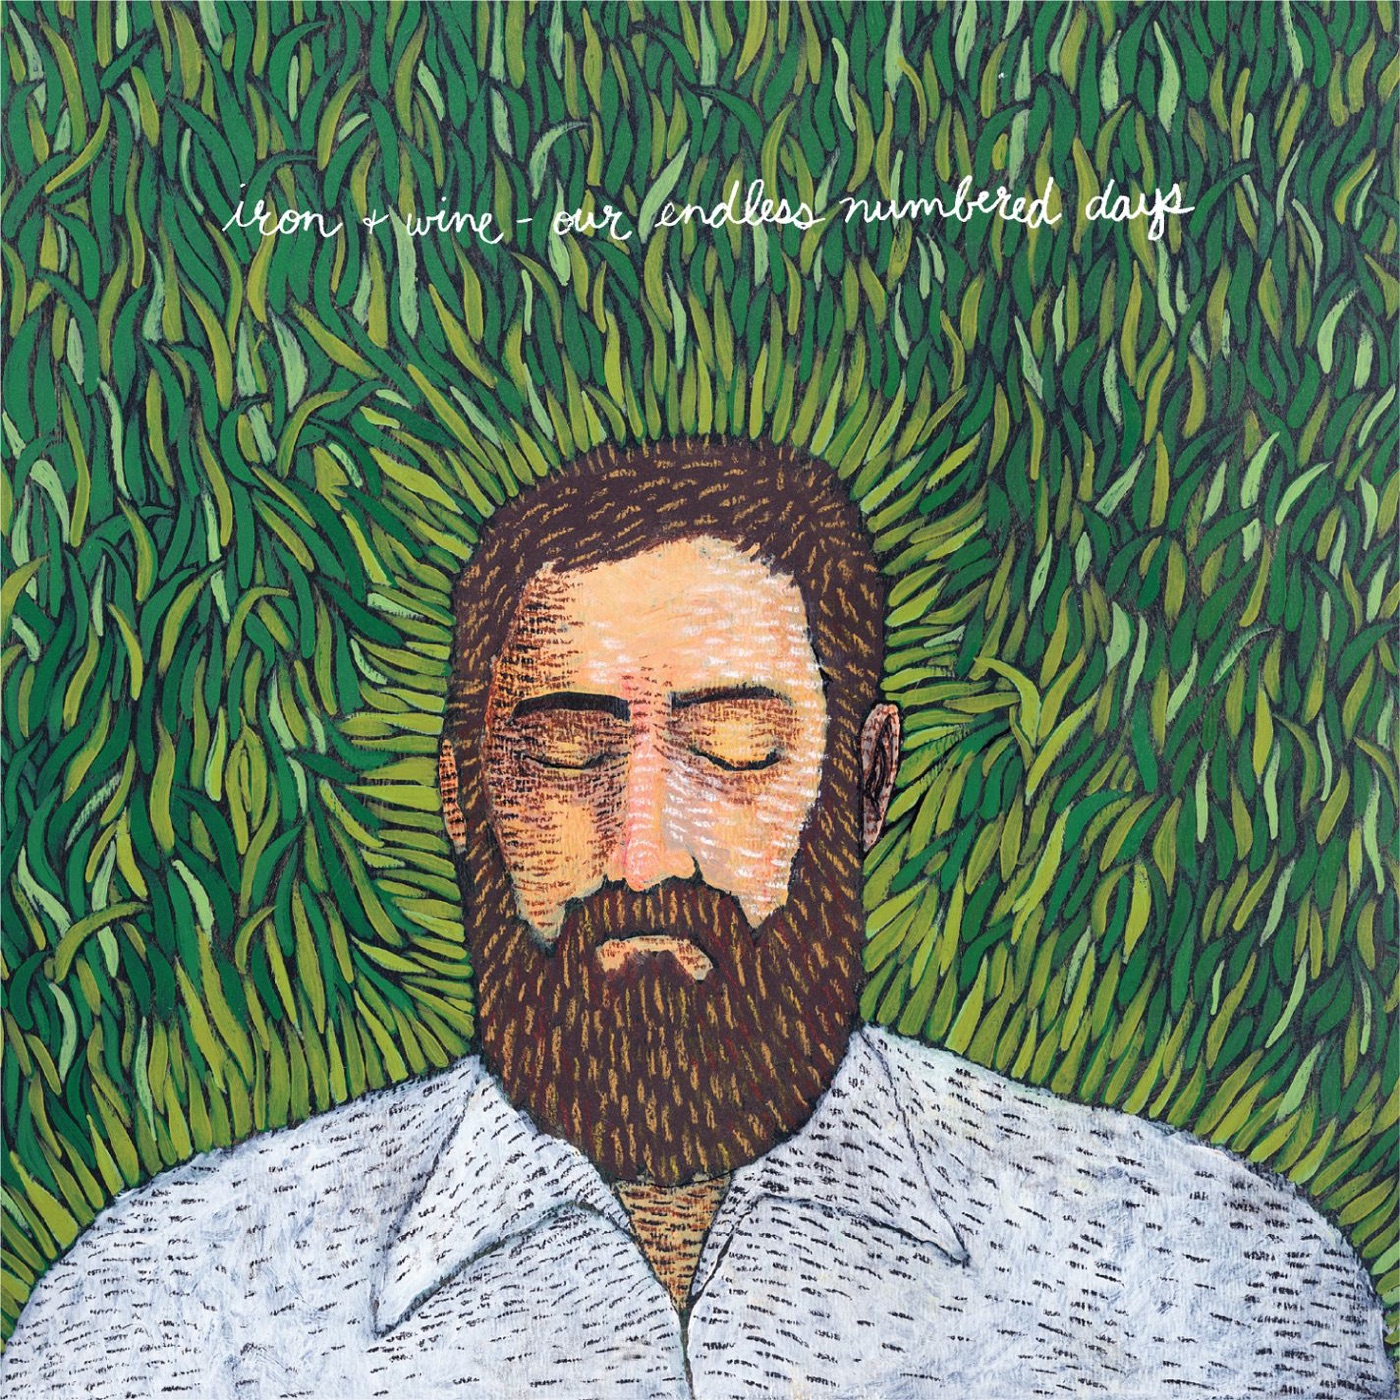 Our Endless Numbered Days by Iron & Wine